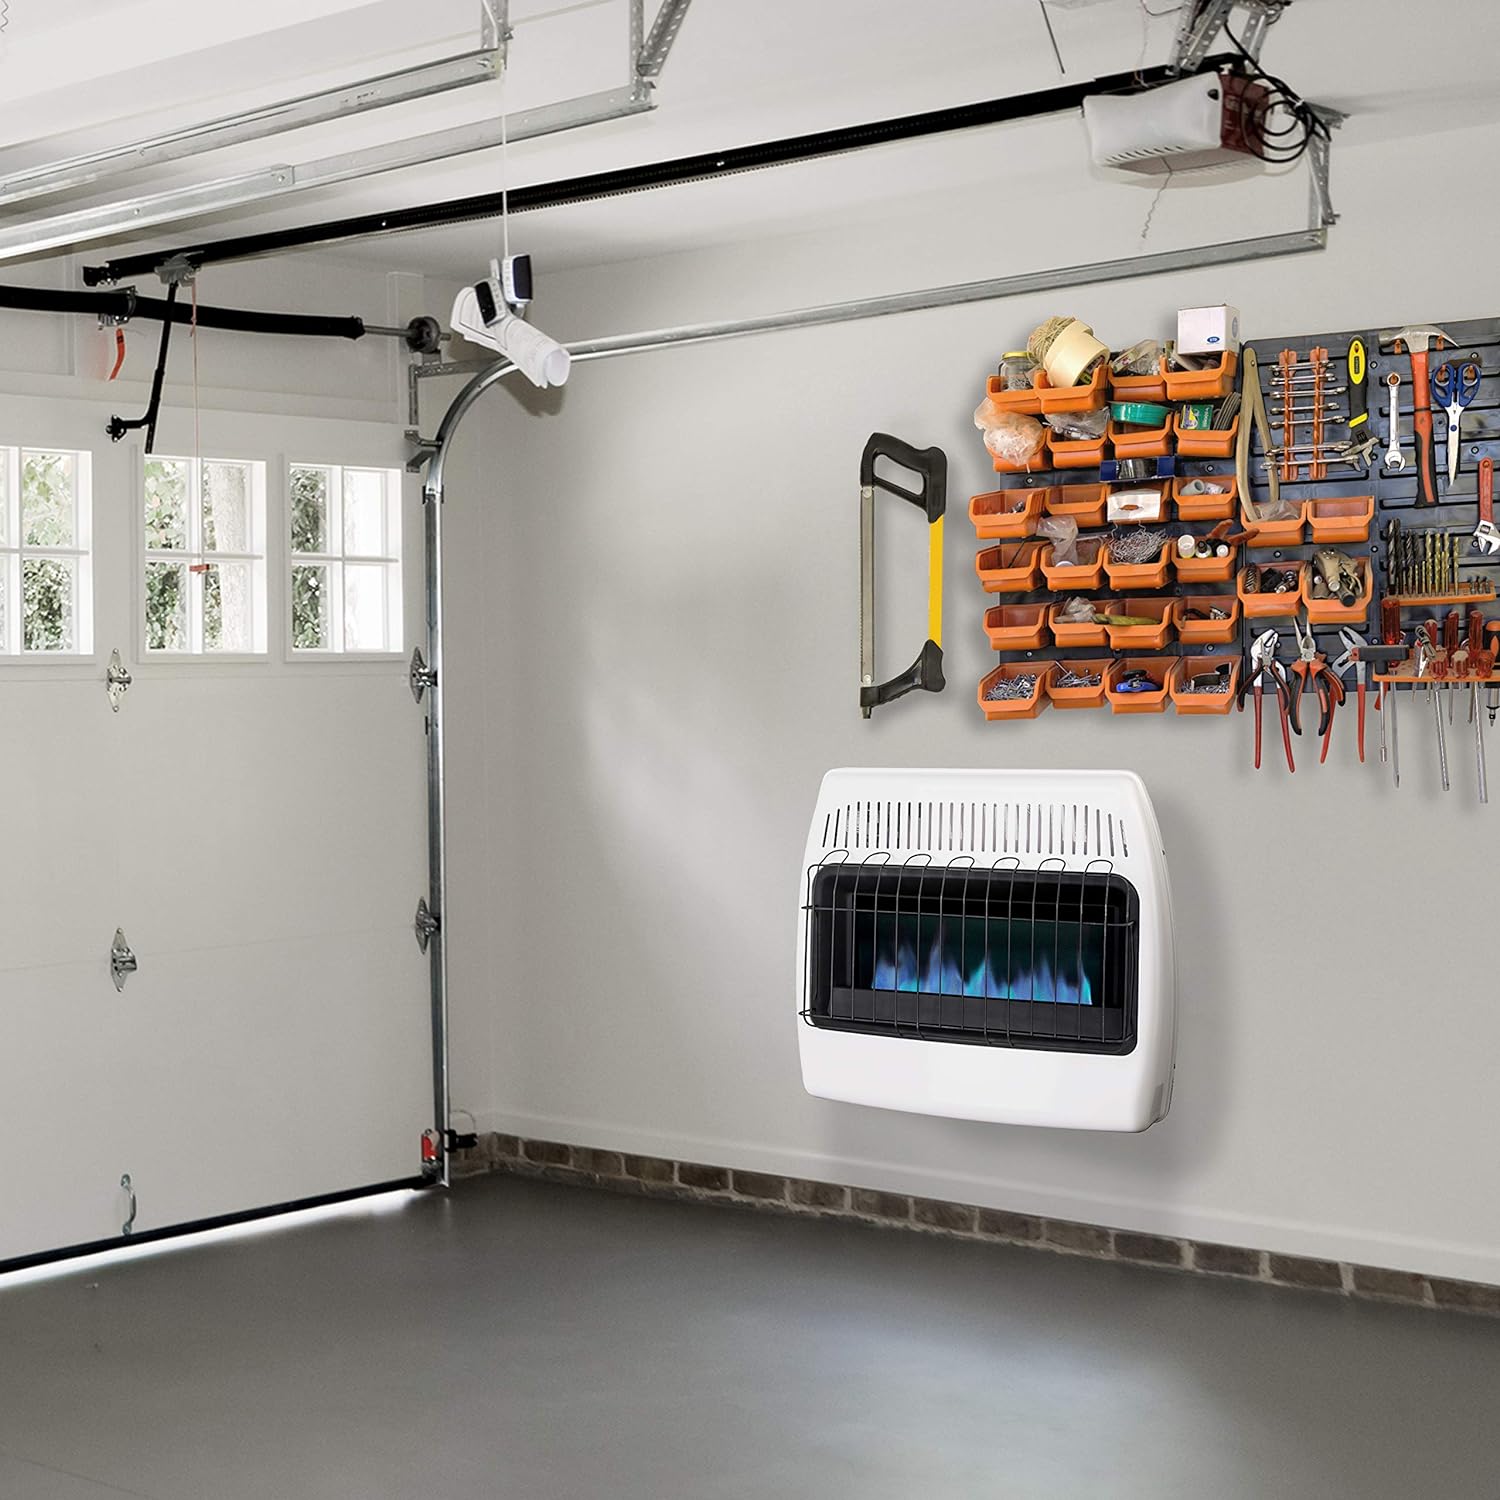 Garage with tools on wall and gas heaters